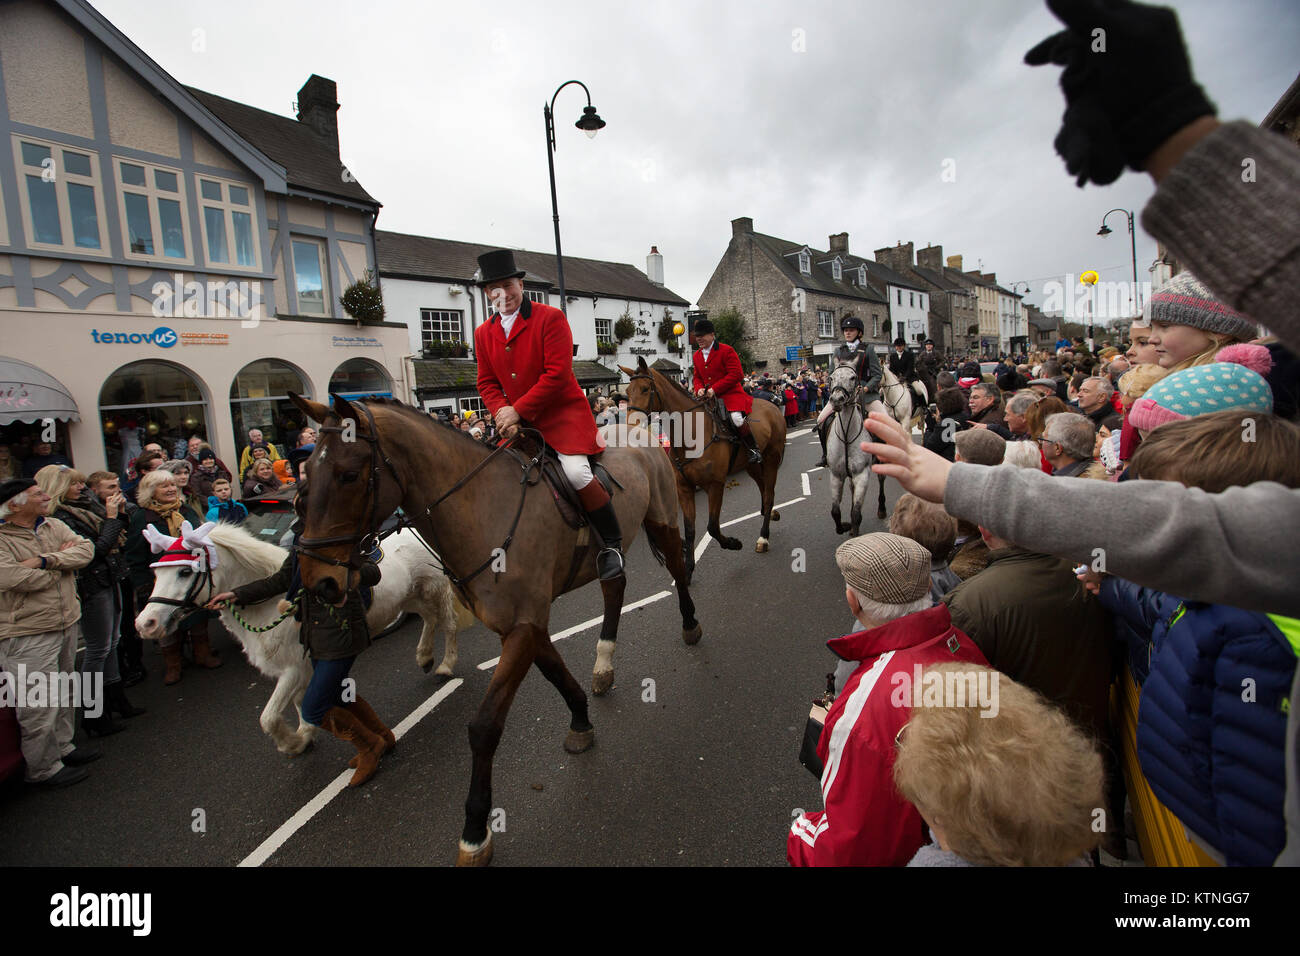 Cowbridge, Vale of Glamorgan, South Wales, United Kingdom 26th December 2017. Glamorgan Boxing Day Hunt parades through Cowbridge, Vale of Glamorgan, South Wales, United Kingdom 26th December 2017. Crowds of people lined the streets to watch the Glamorgan Boxing Day Hunt as it paraded through Cowbridge, Vale of Glamorgan. Credit: Jeff Gilbert/Alamy Live News Stock Photo